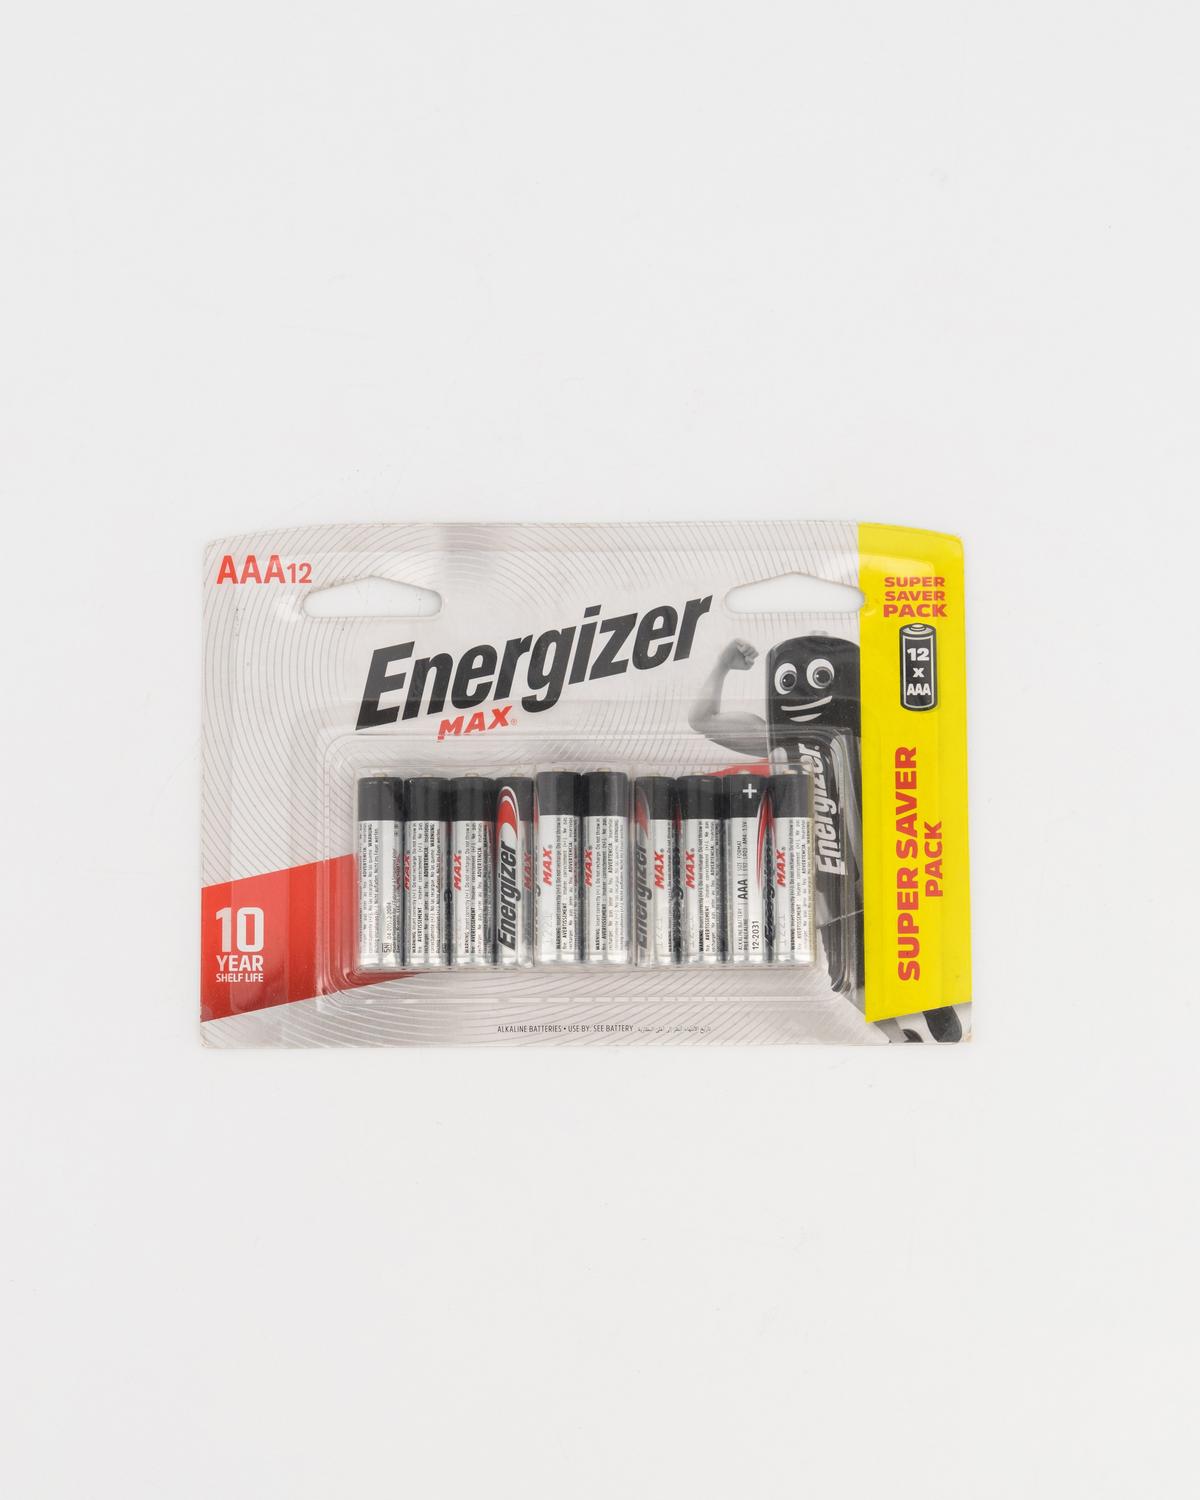 Energizer Max AAA Batteries - 12 Pack -  No Colour